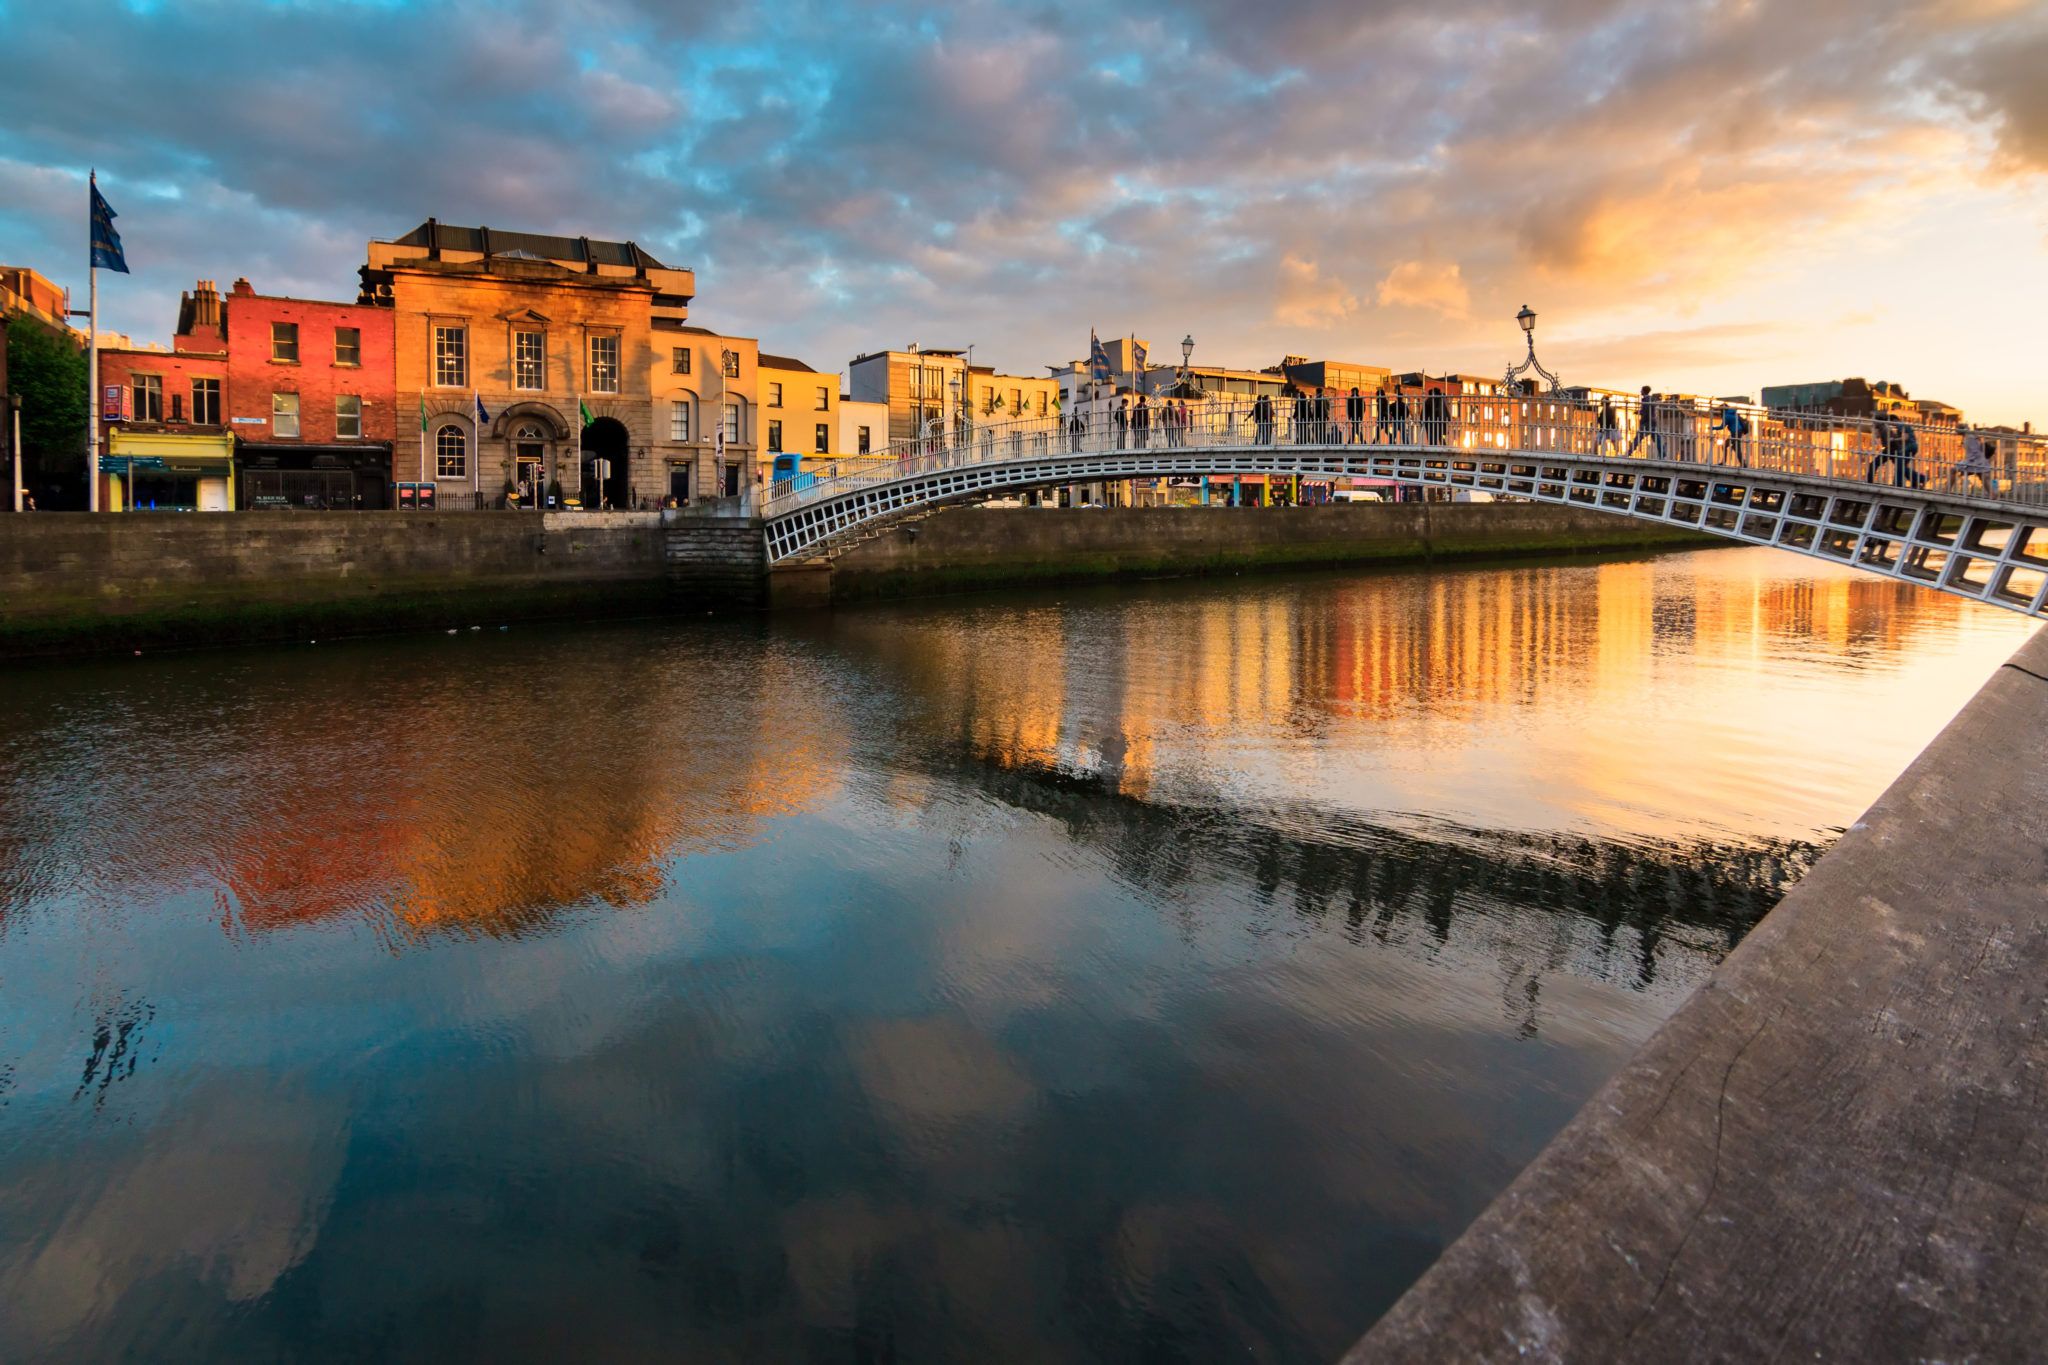 10 spots to get your history and culture fix in Dublin this autumn